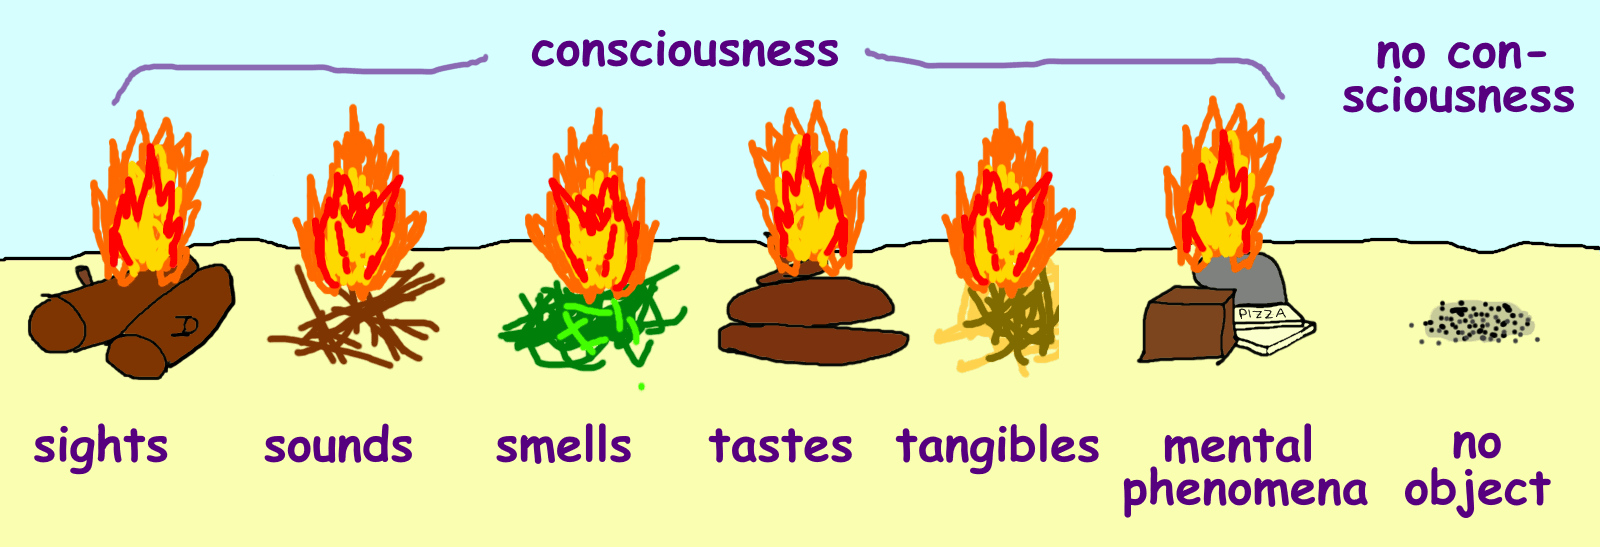 Six fires burning different substances (logs, twigs, grass, dung, chaff, and rubbish) labeled ‘sight’, ‘hearing’, smell’, ‘taste’, ‘touch’ and ‘mind’. Next to it is a pile of ashes labeled ‘no senses’.